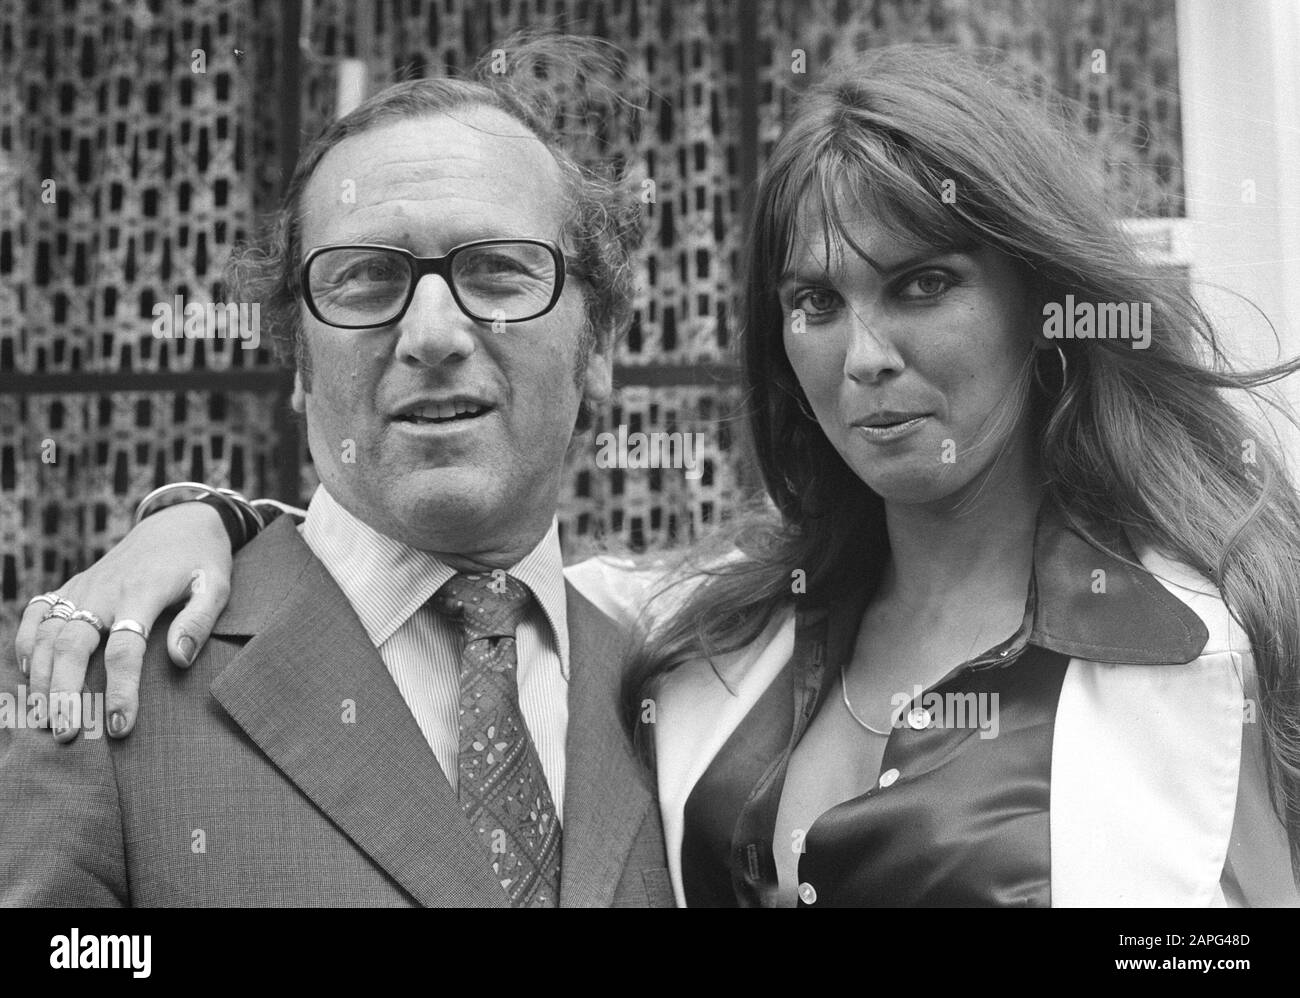 Actress Caroline Munro in Amsterdam with premiere The Golden Voyage of Sinbad; Caroline Munro (r) with film producer Charles H. Schneer; Stock Photo